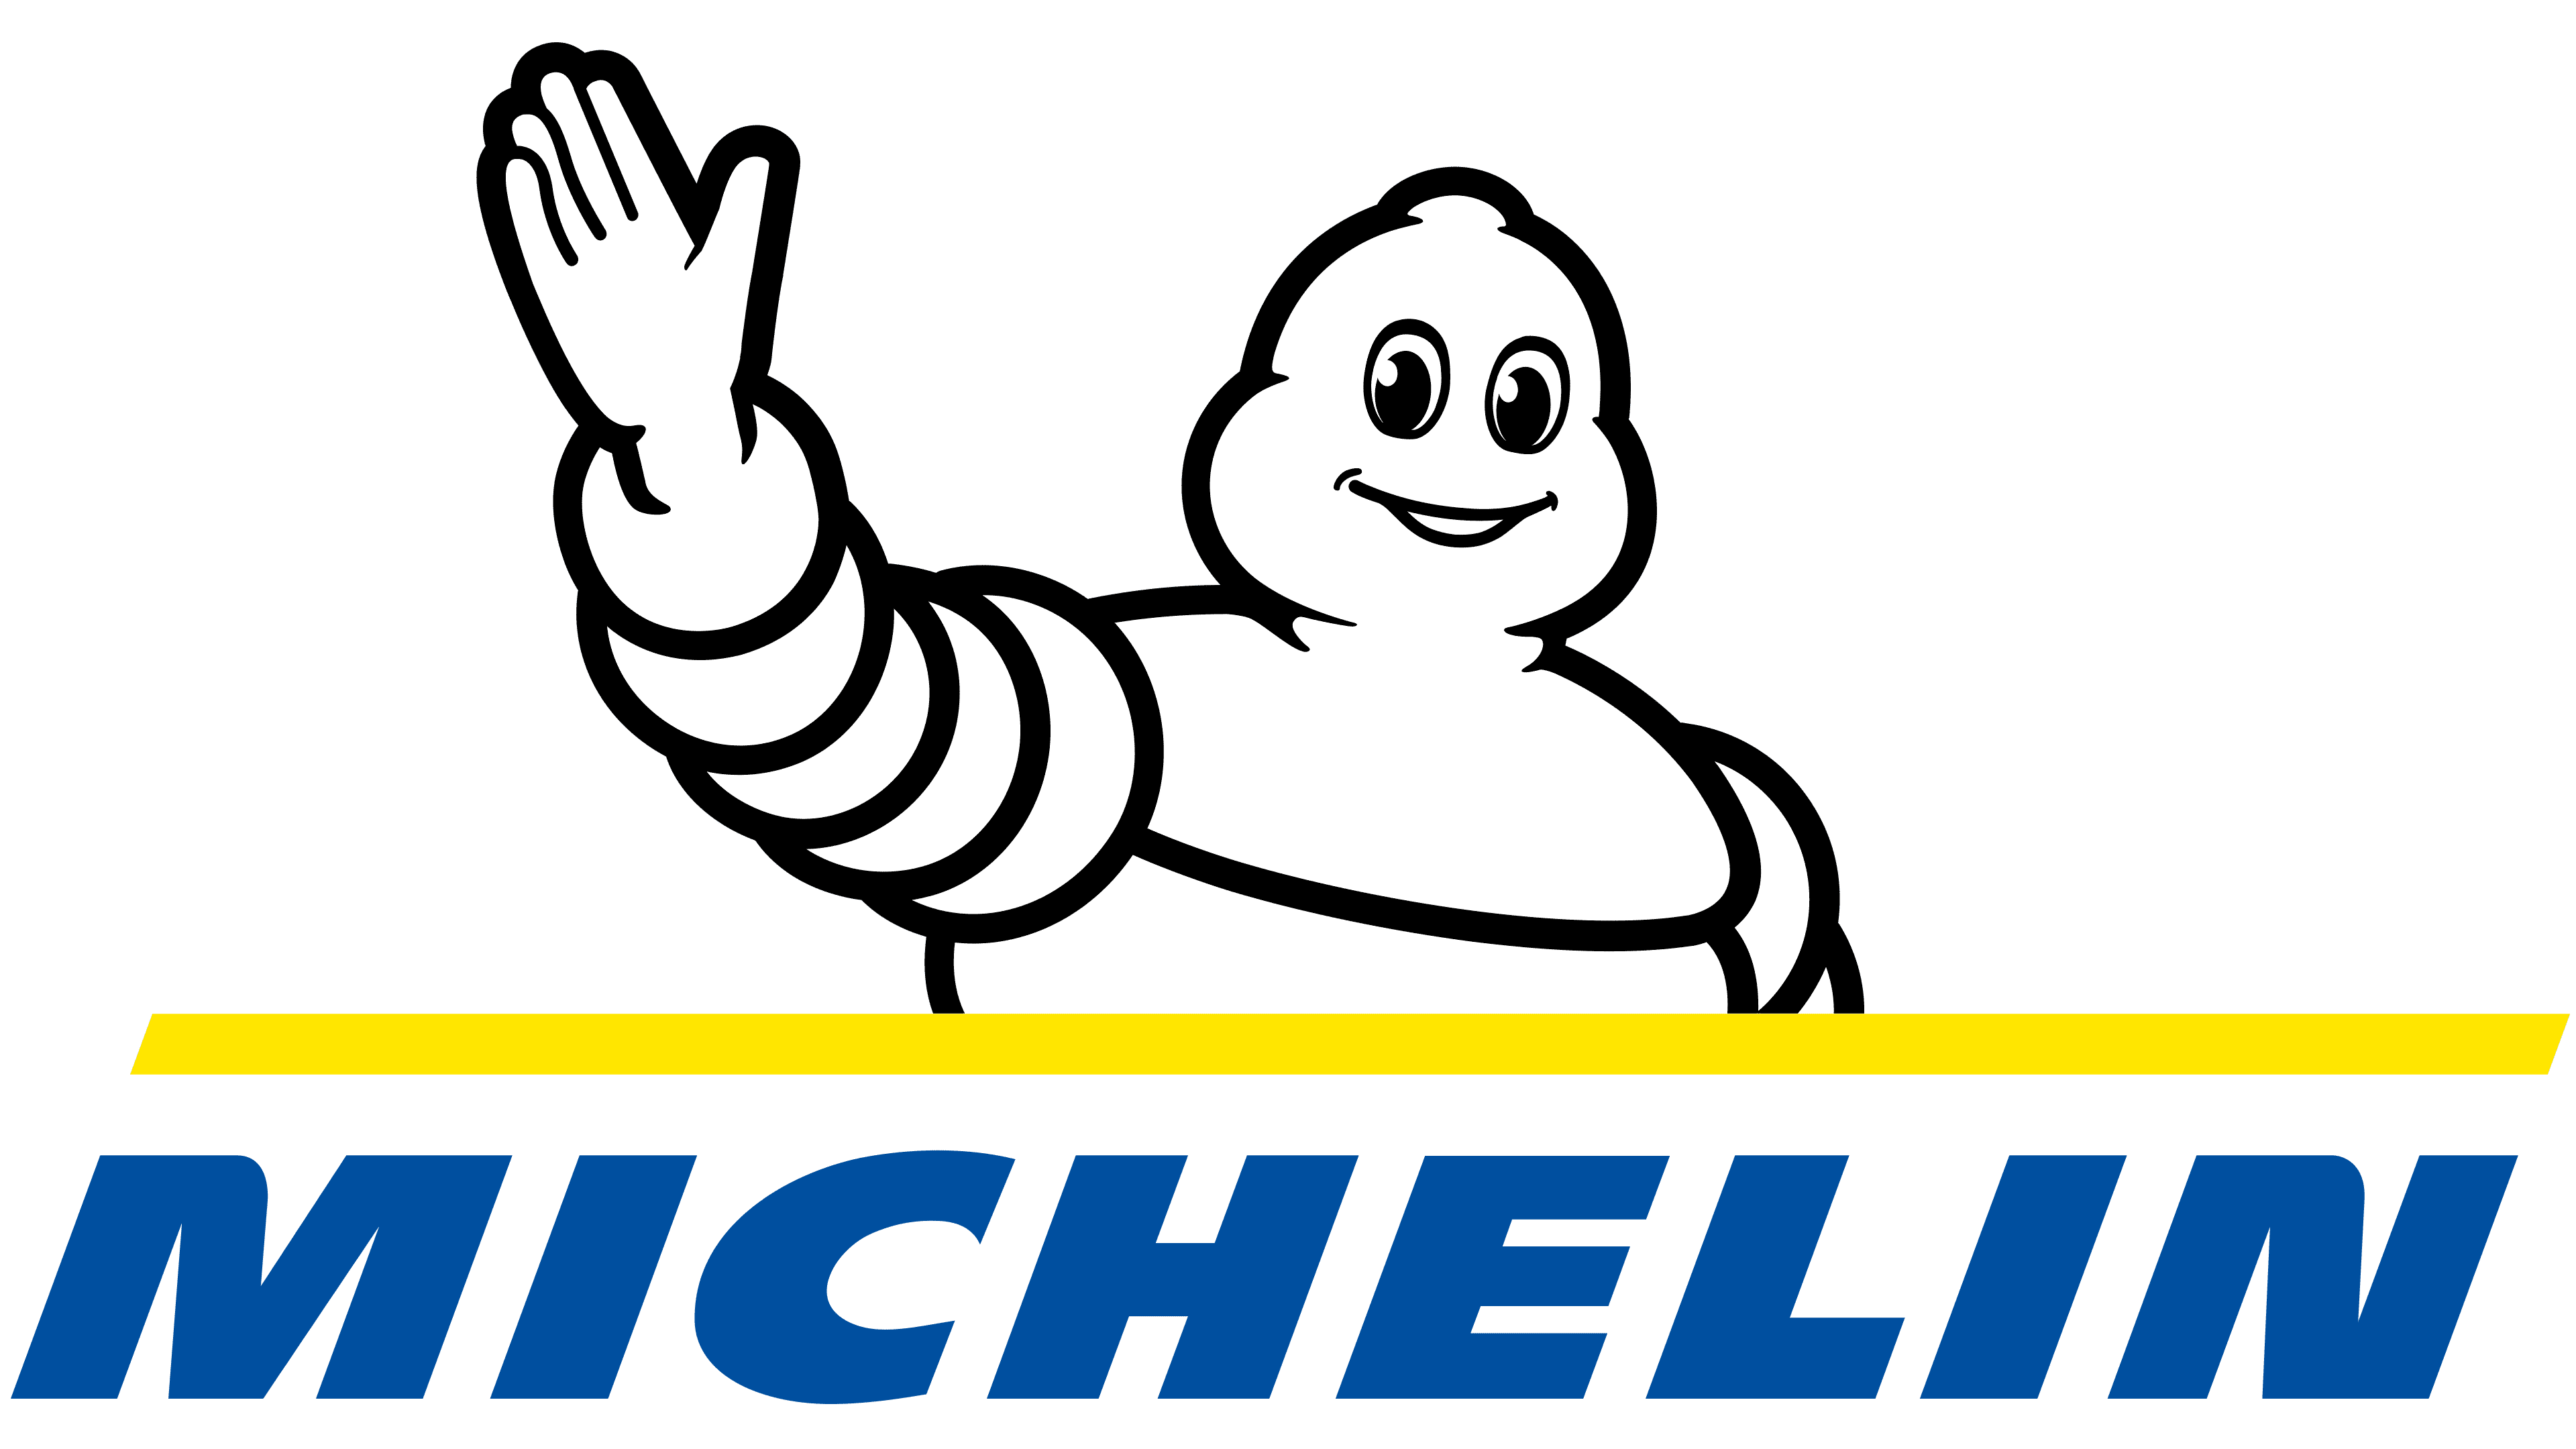 https://industry4climate.eu/wp-content/uploads/2021/02/Michelin-Logo.png